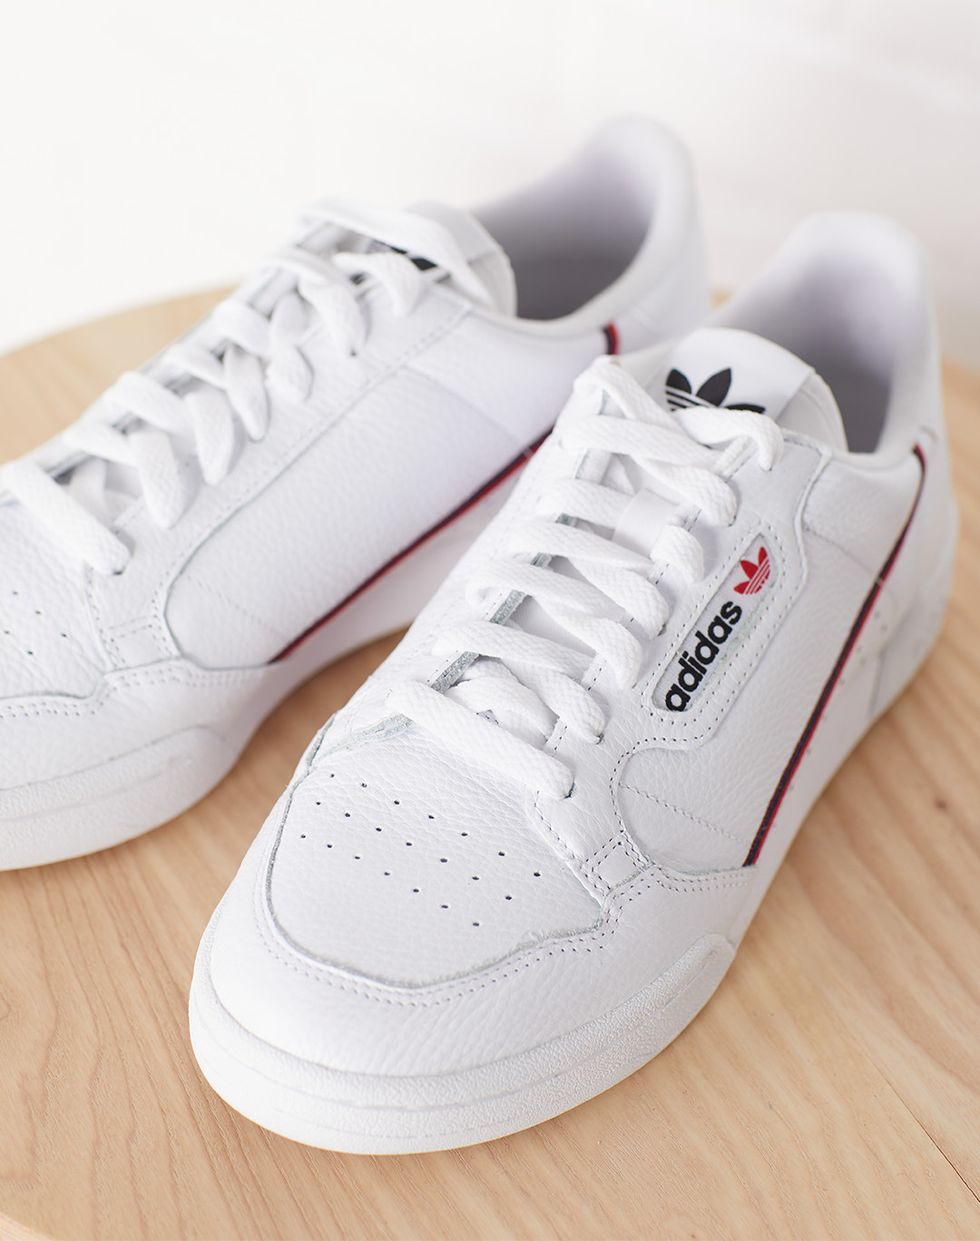 Fresh White Sneaker Can (and Should) Wear This Spring